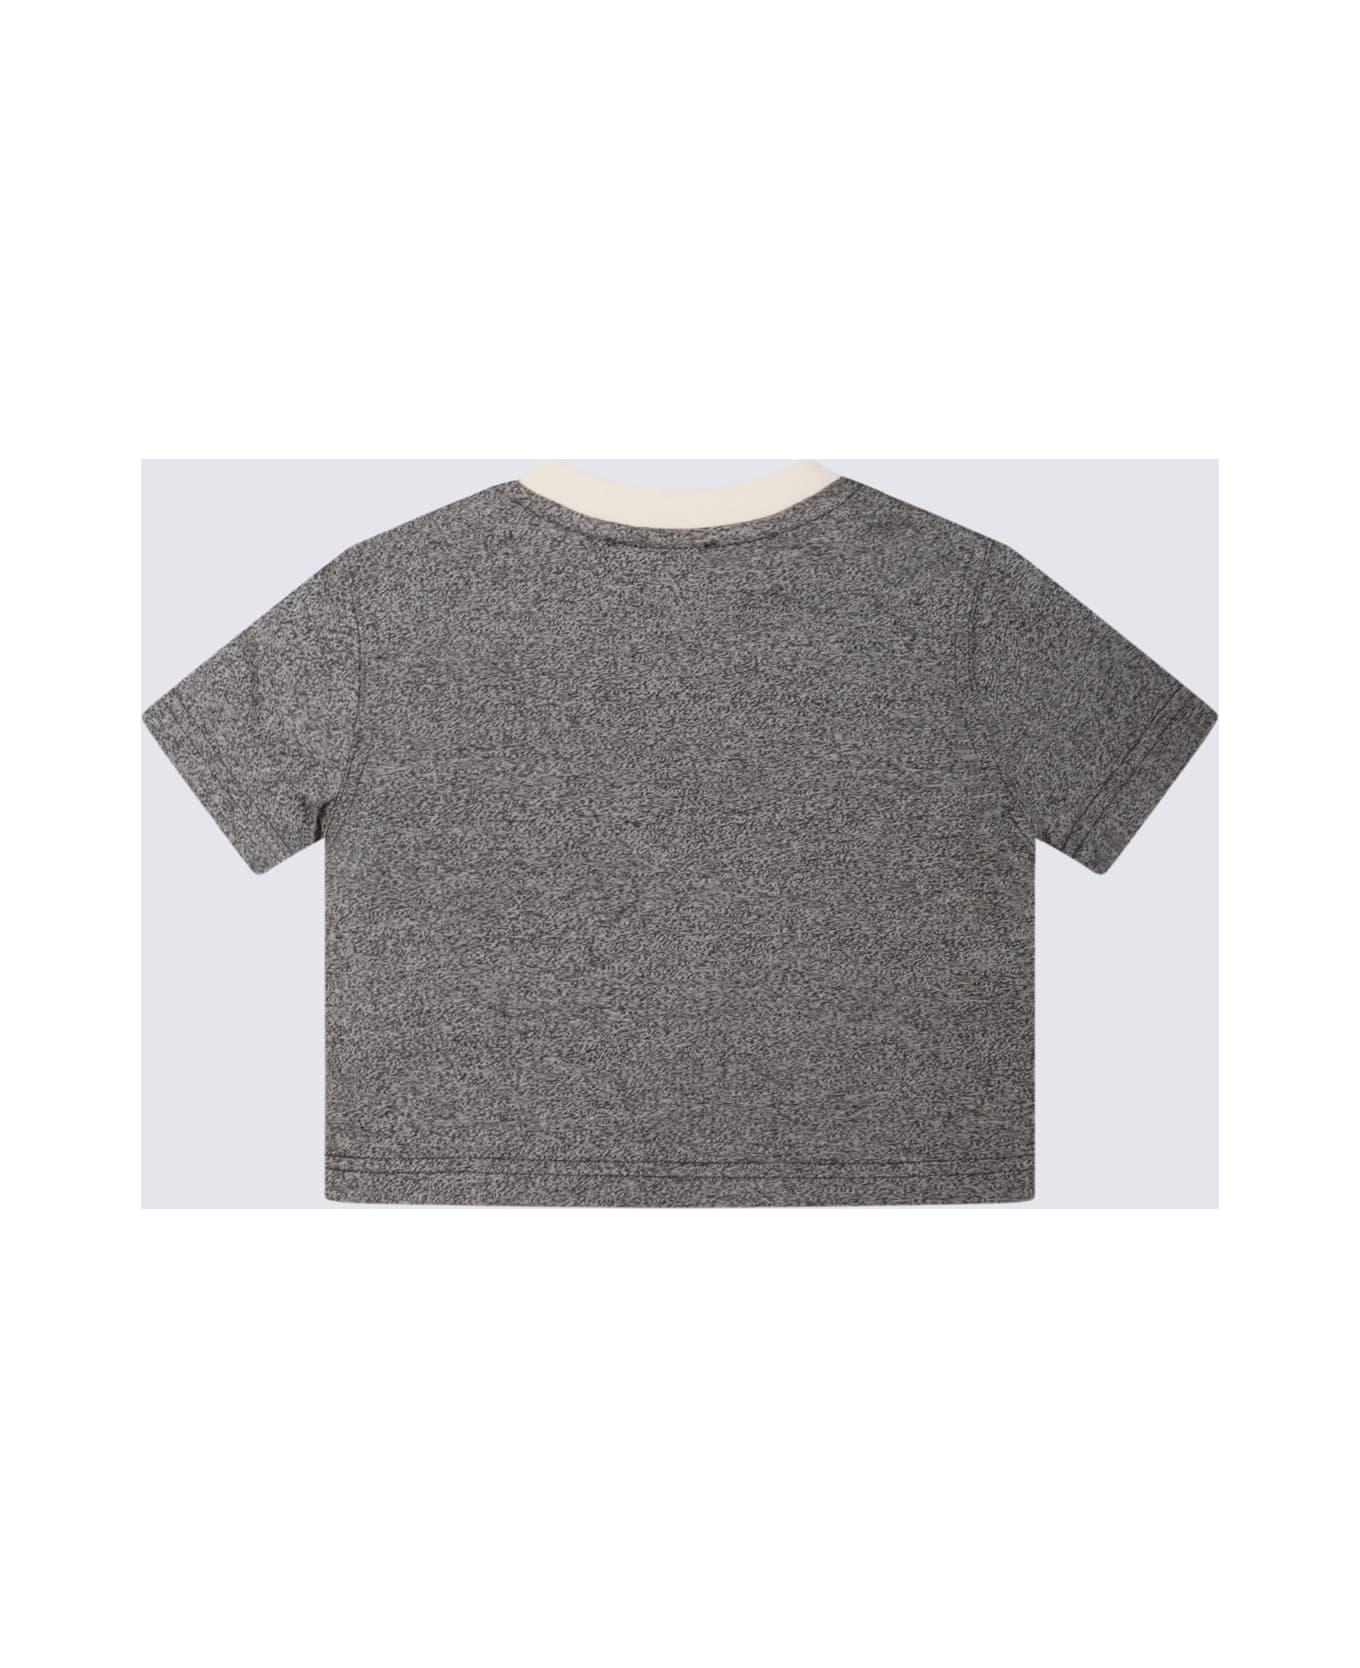 Burberry Grey And White Cotton T-shirt - CHARCOAL GREY MELANG Tシャツ＆ポロシャツ